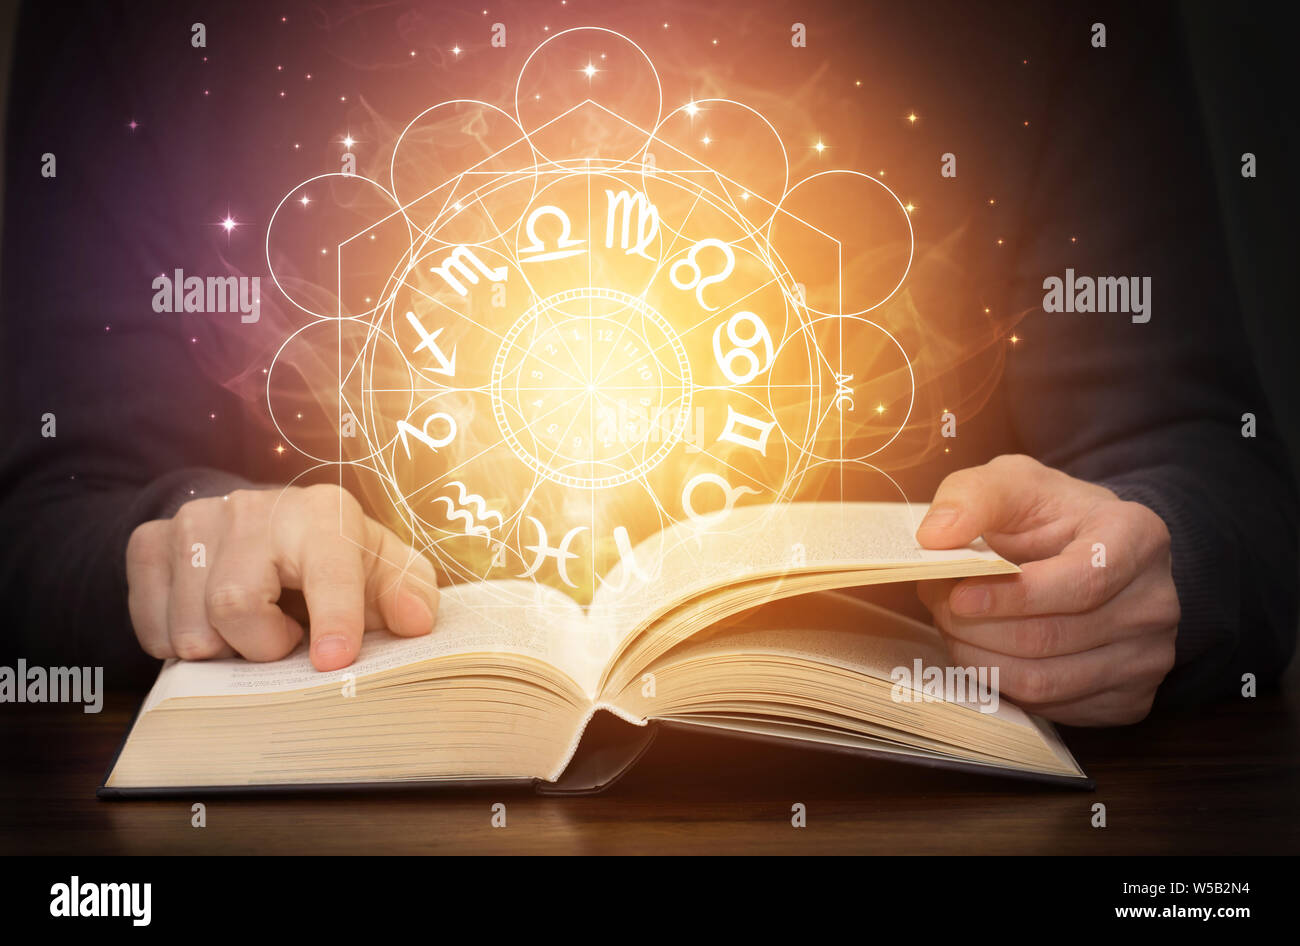 astrology book with zodiac signs and shining light Stock Photo